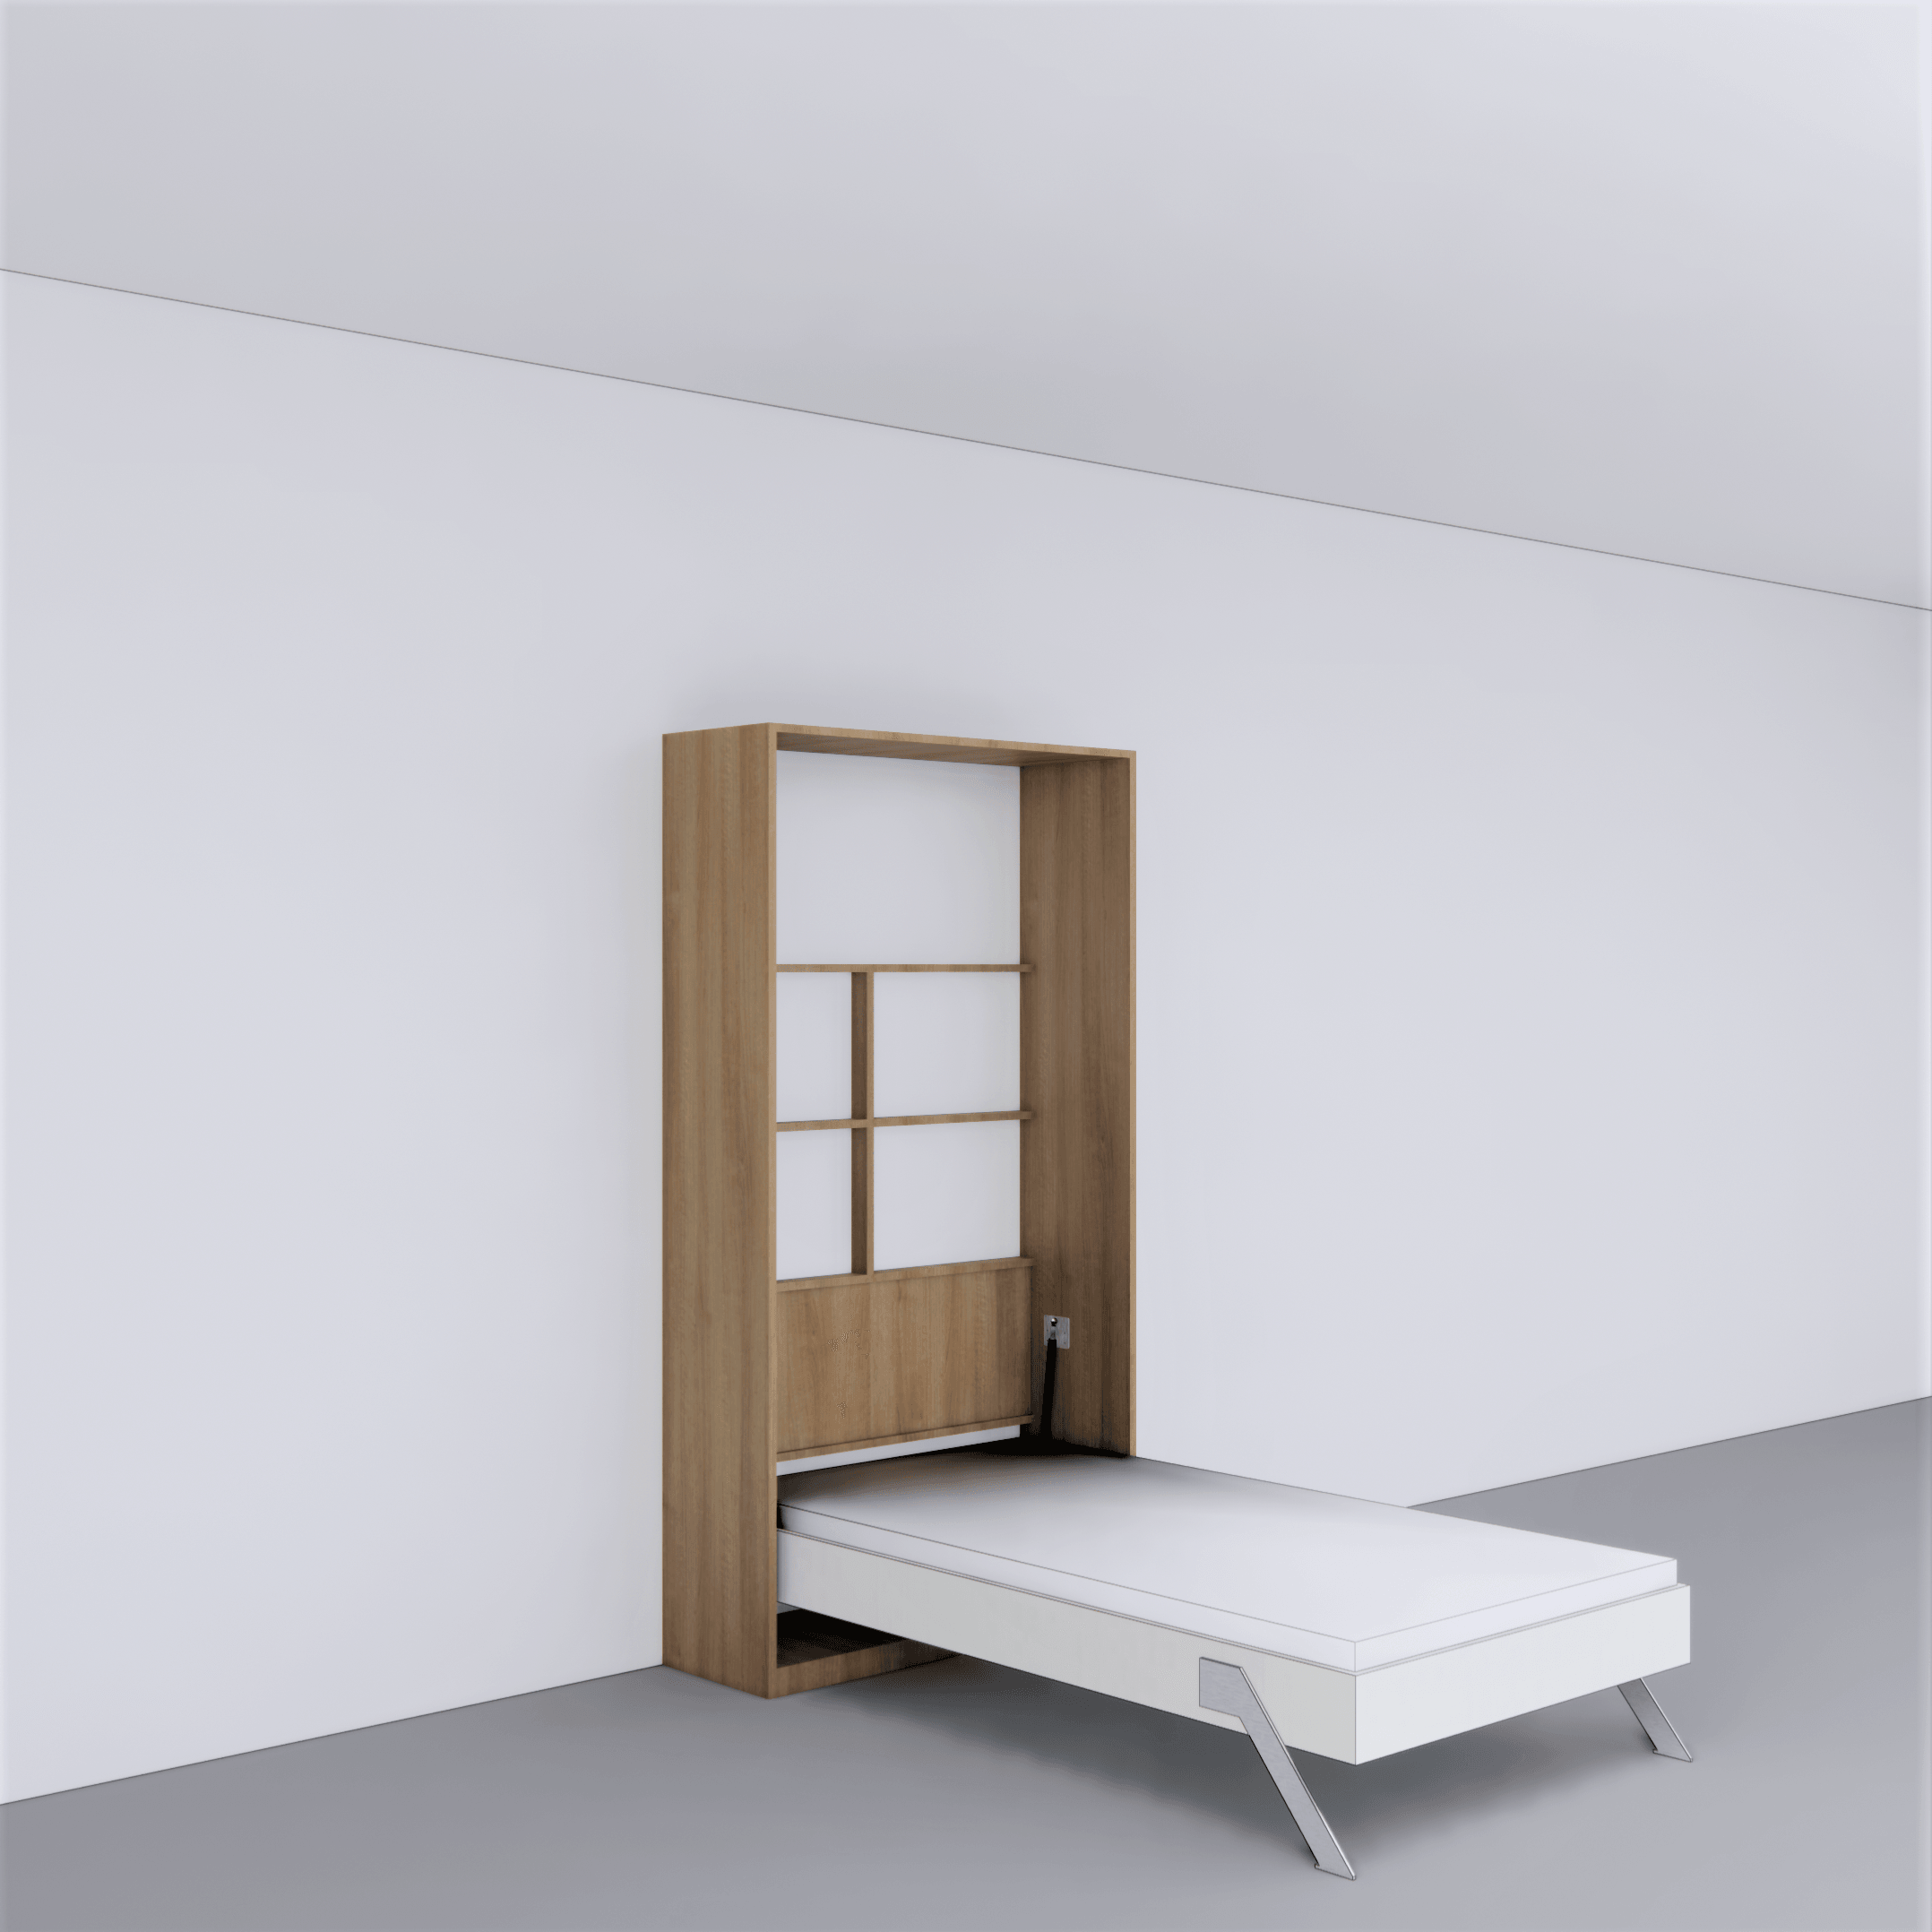 Single Vertical Bed with iDesk - InvisibleBed.com